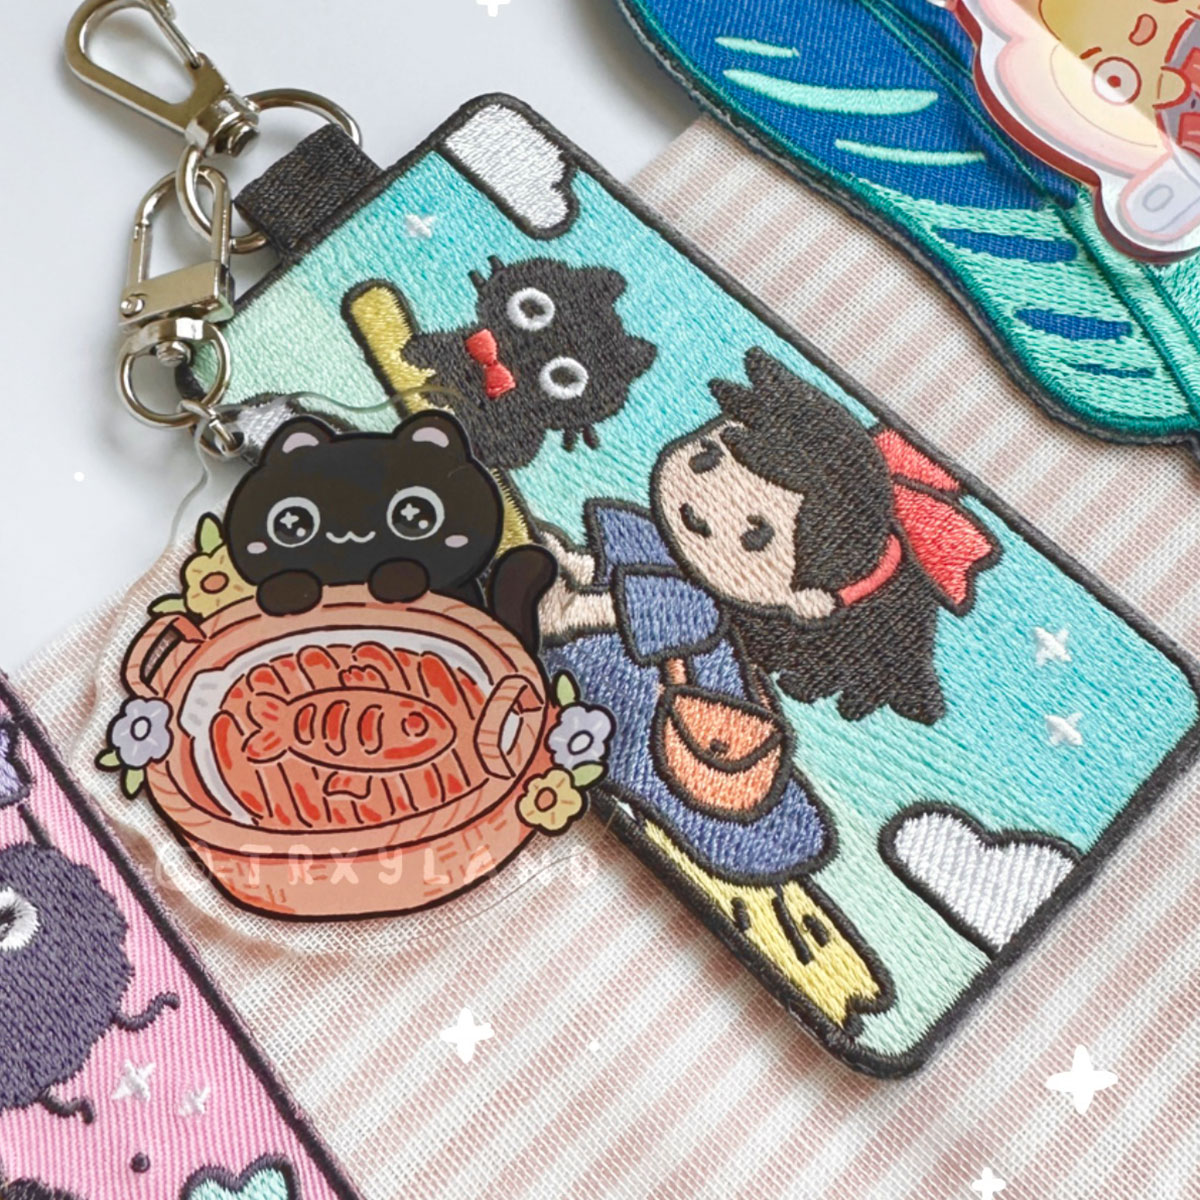 New stuff in the sh0p! Capy friends, Kiki keyring & more 🍹✨ 